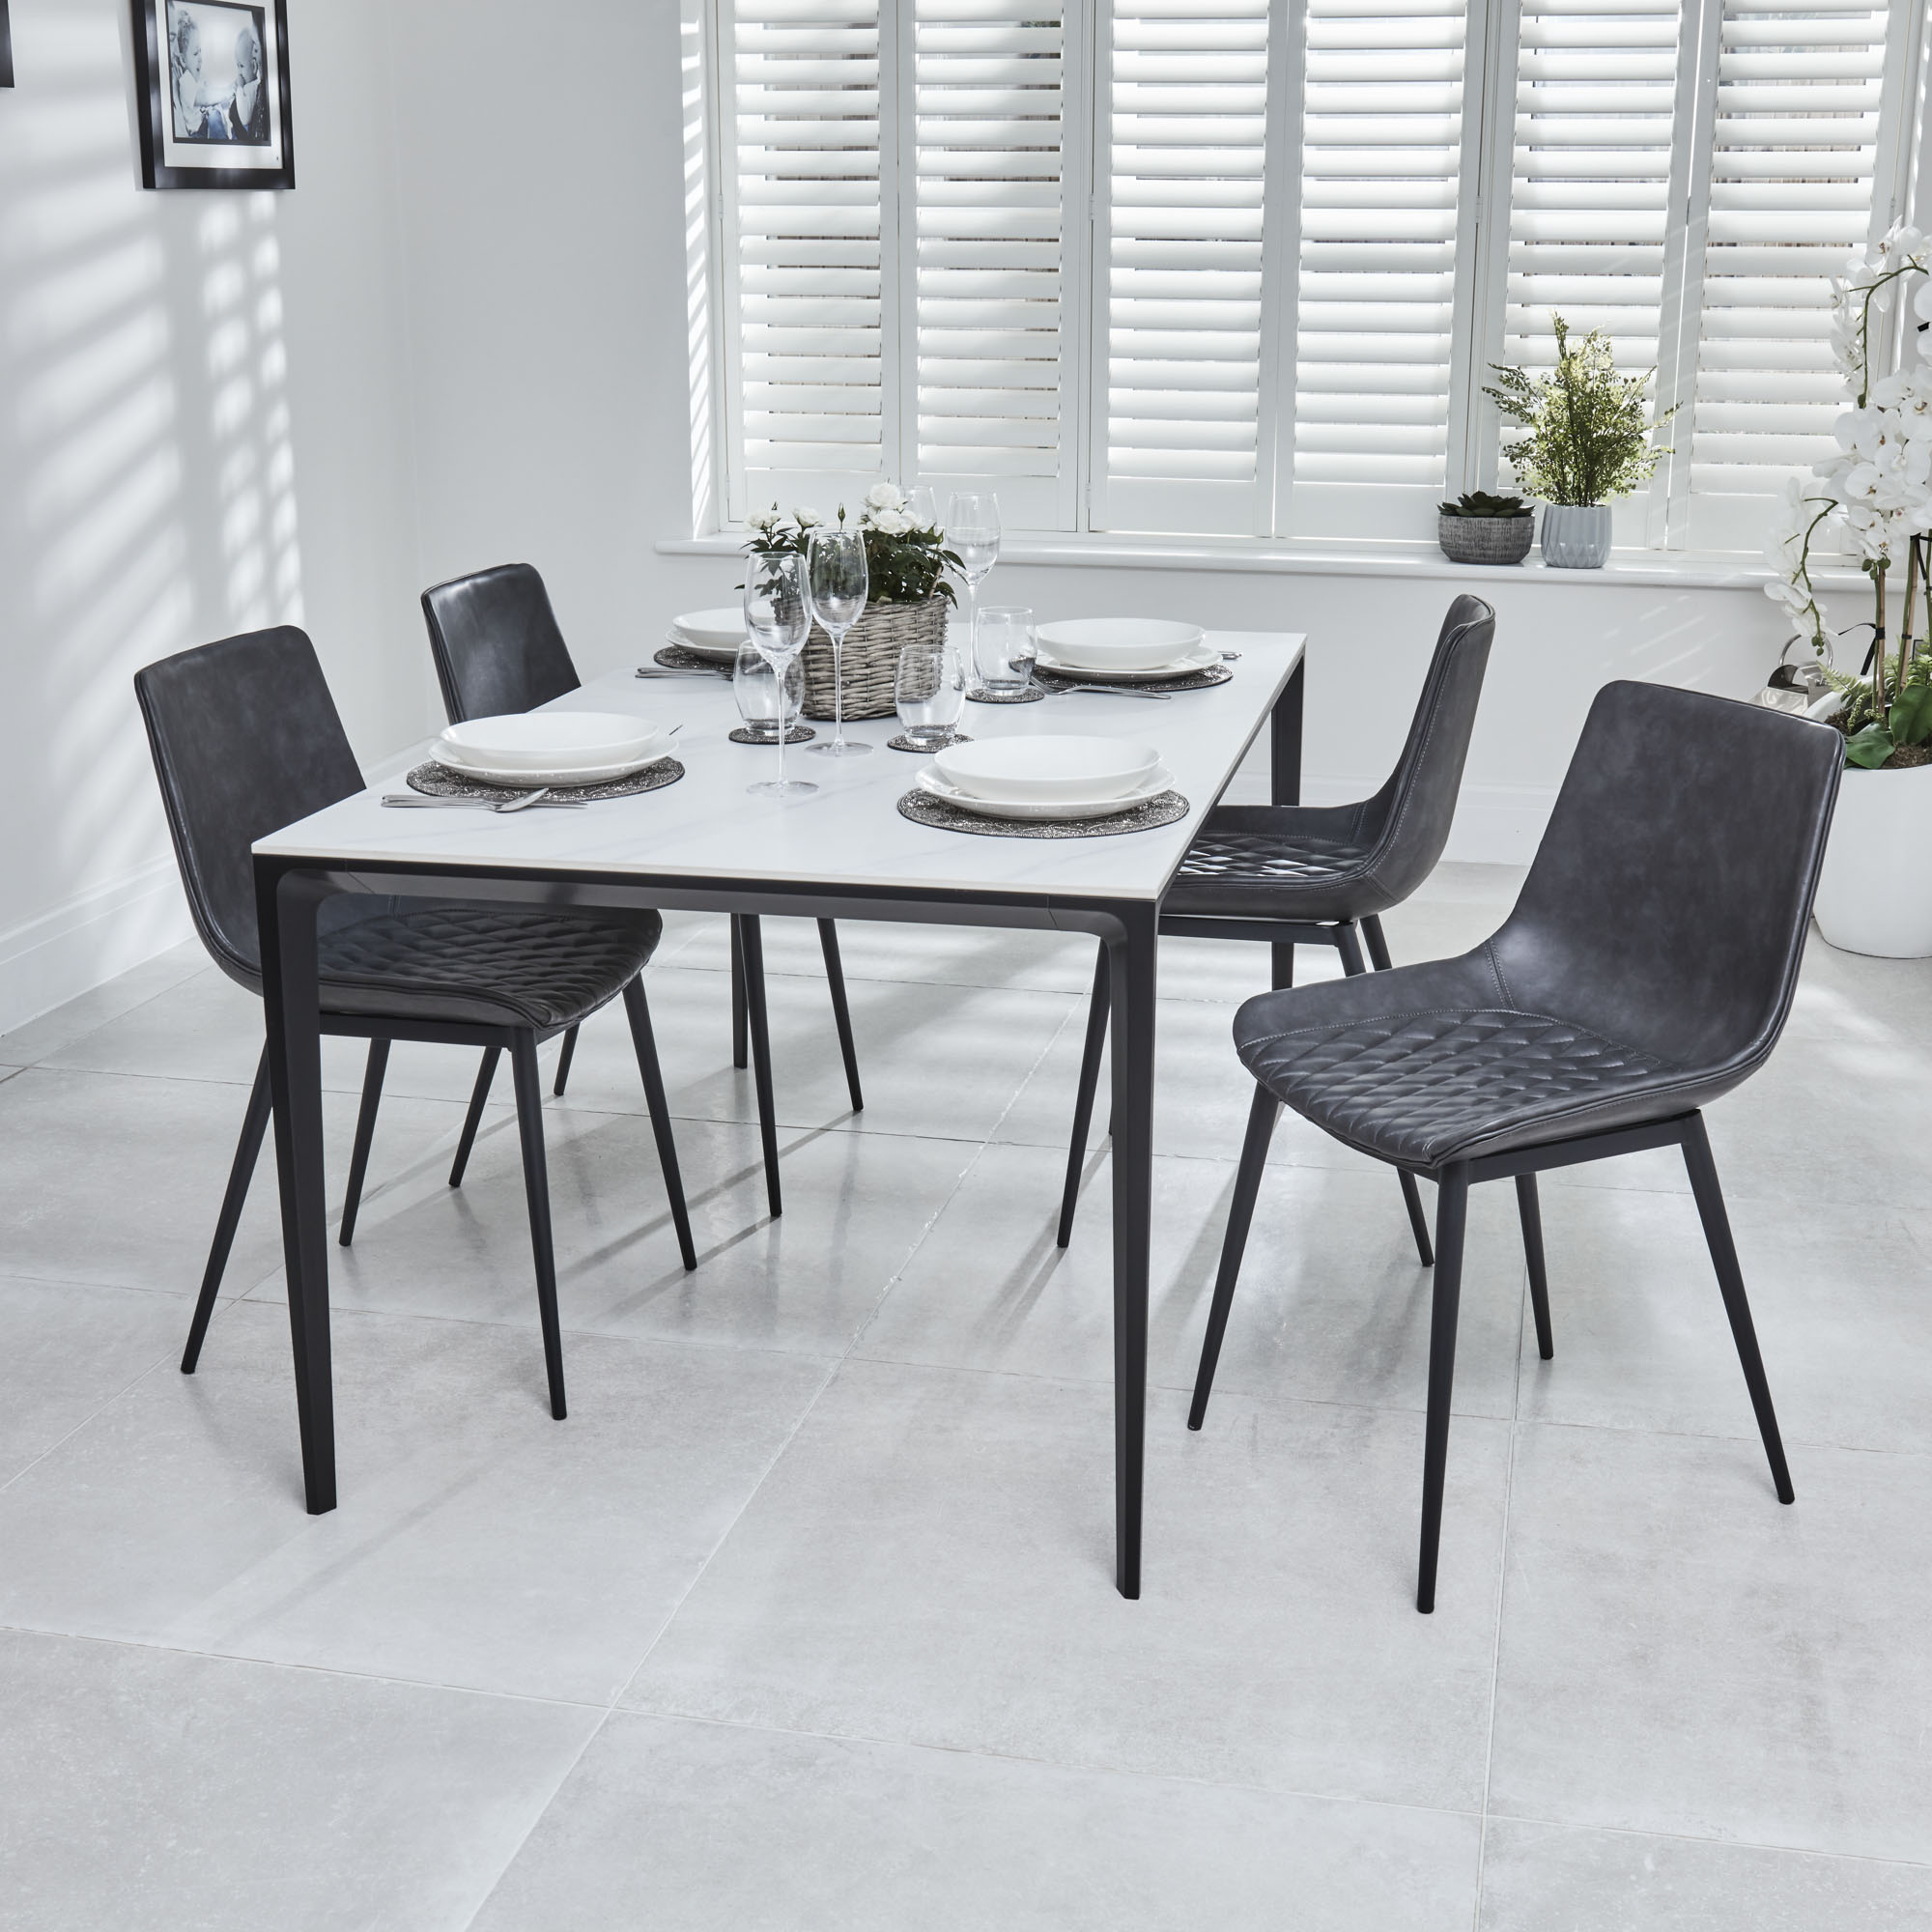 Bellagio 1.6M White Sintered Stone Dining Table with 4x Leo Grey Dining Chairs